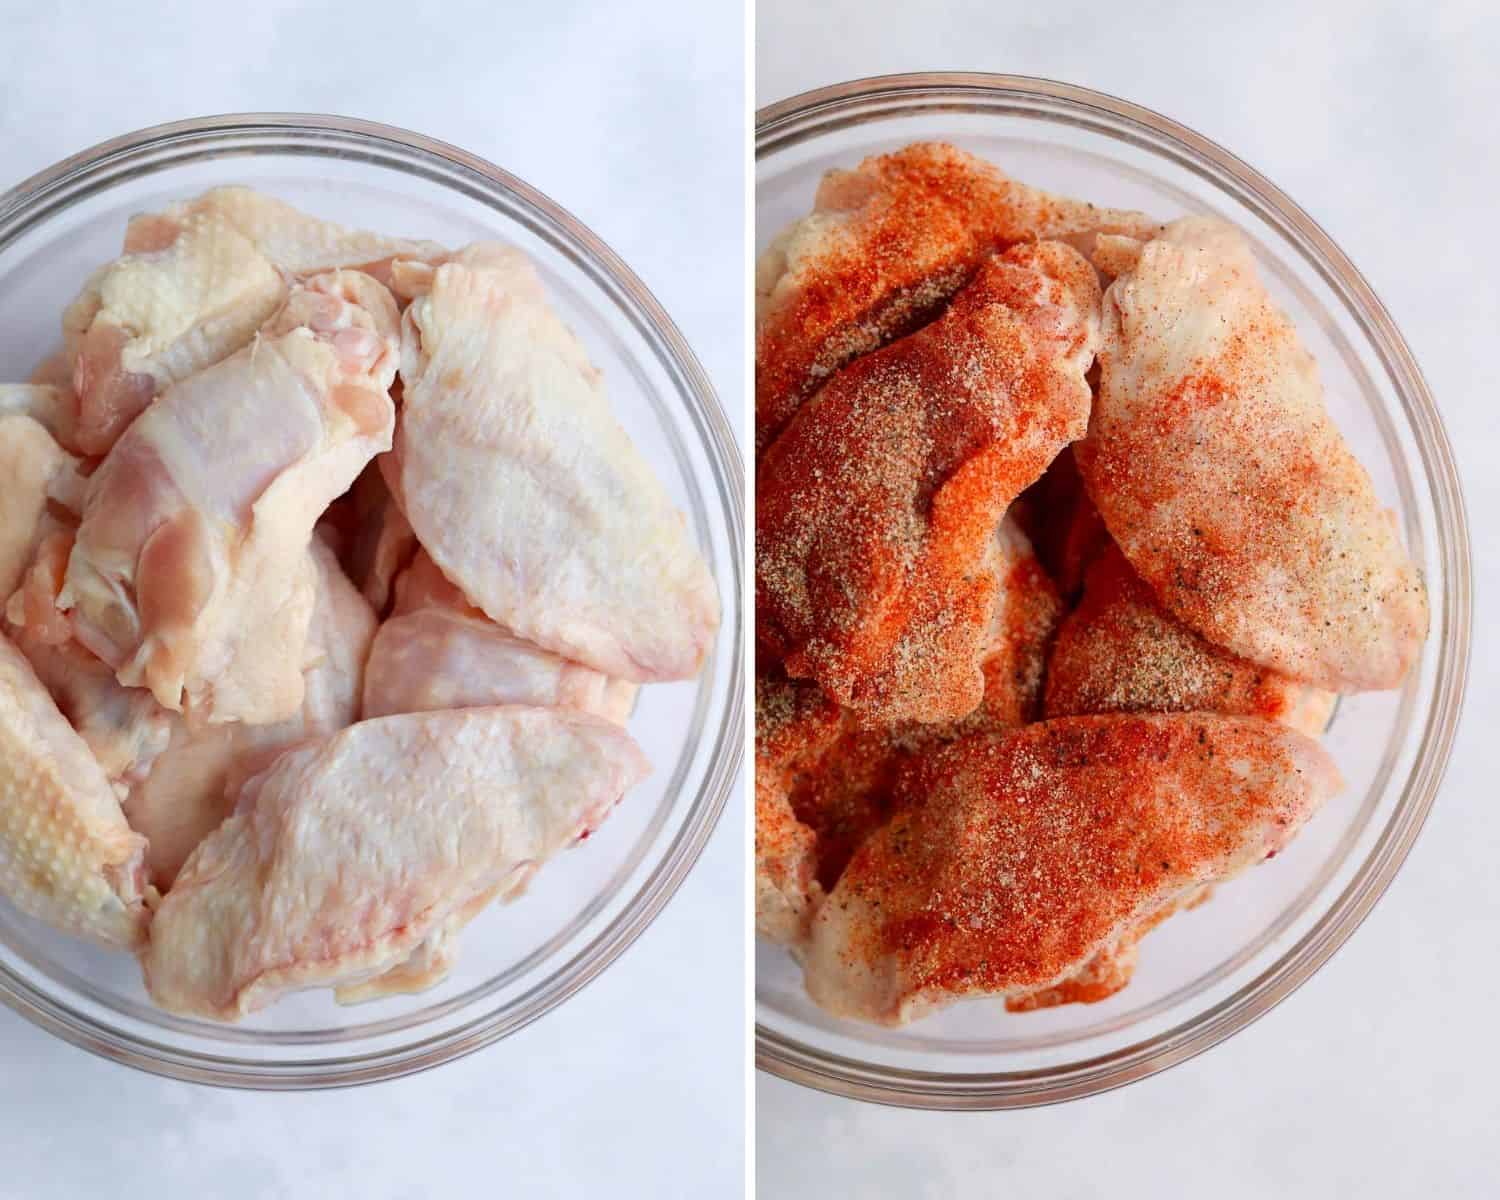 Wings before and after seasoning.